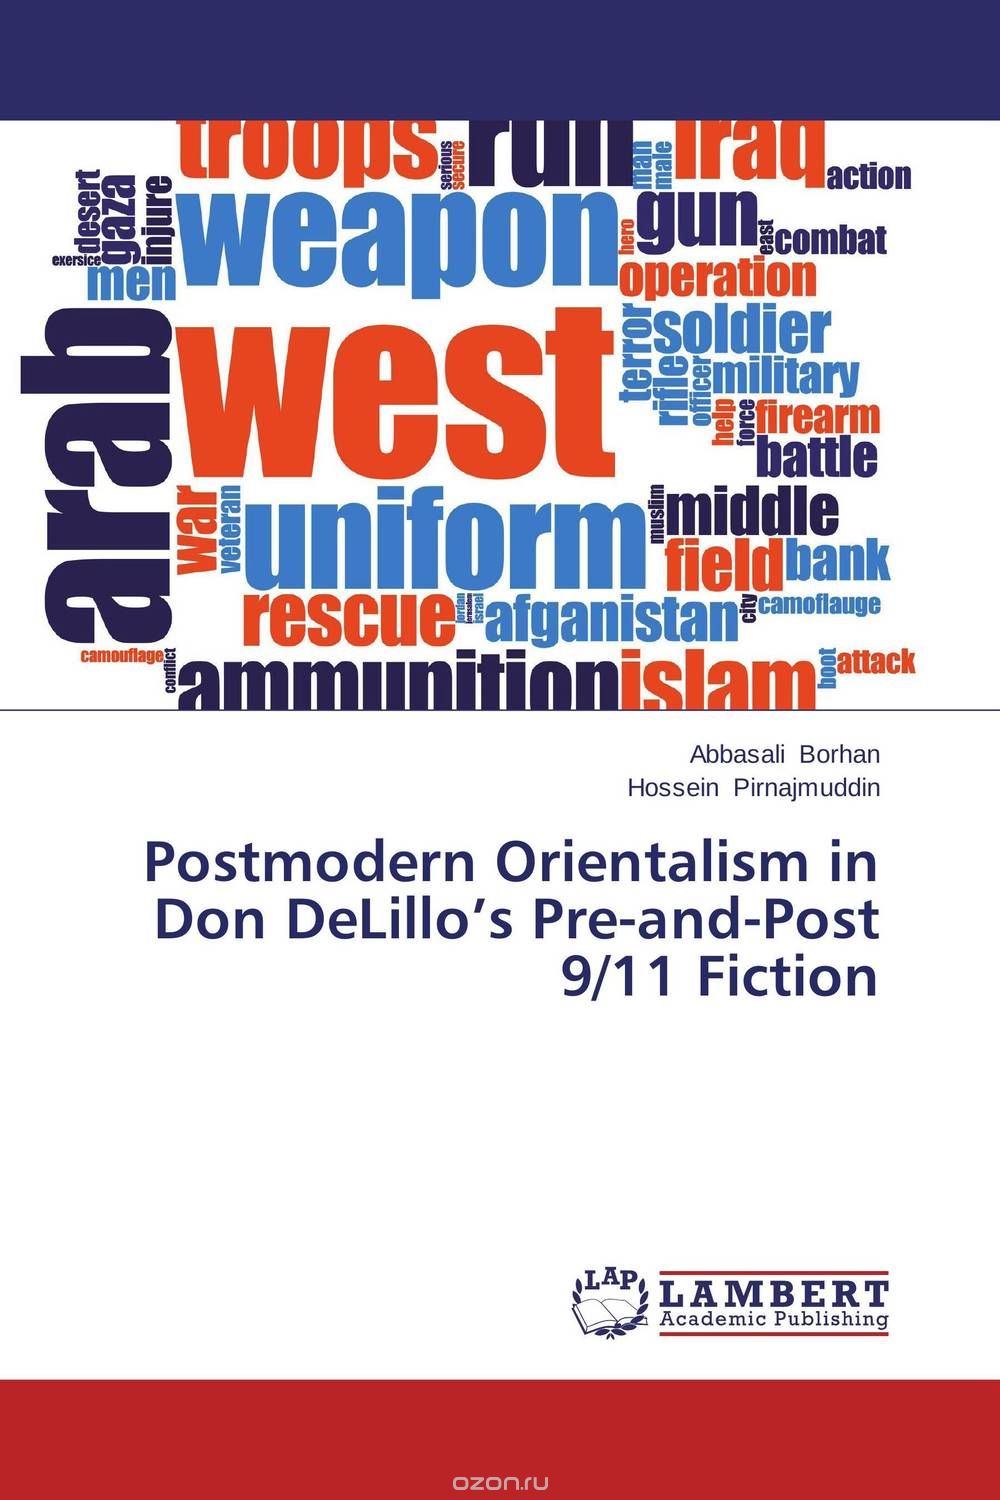 Postmodern Orientalism in Don DeLillo’s Pre-and-Post 9/11 Fiction